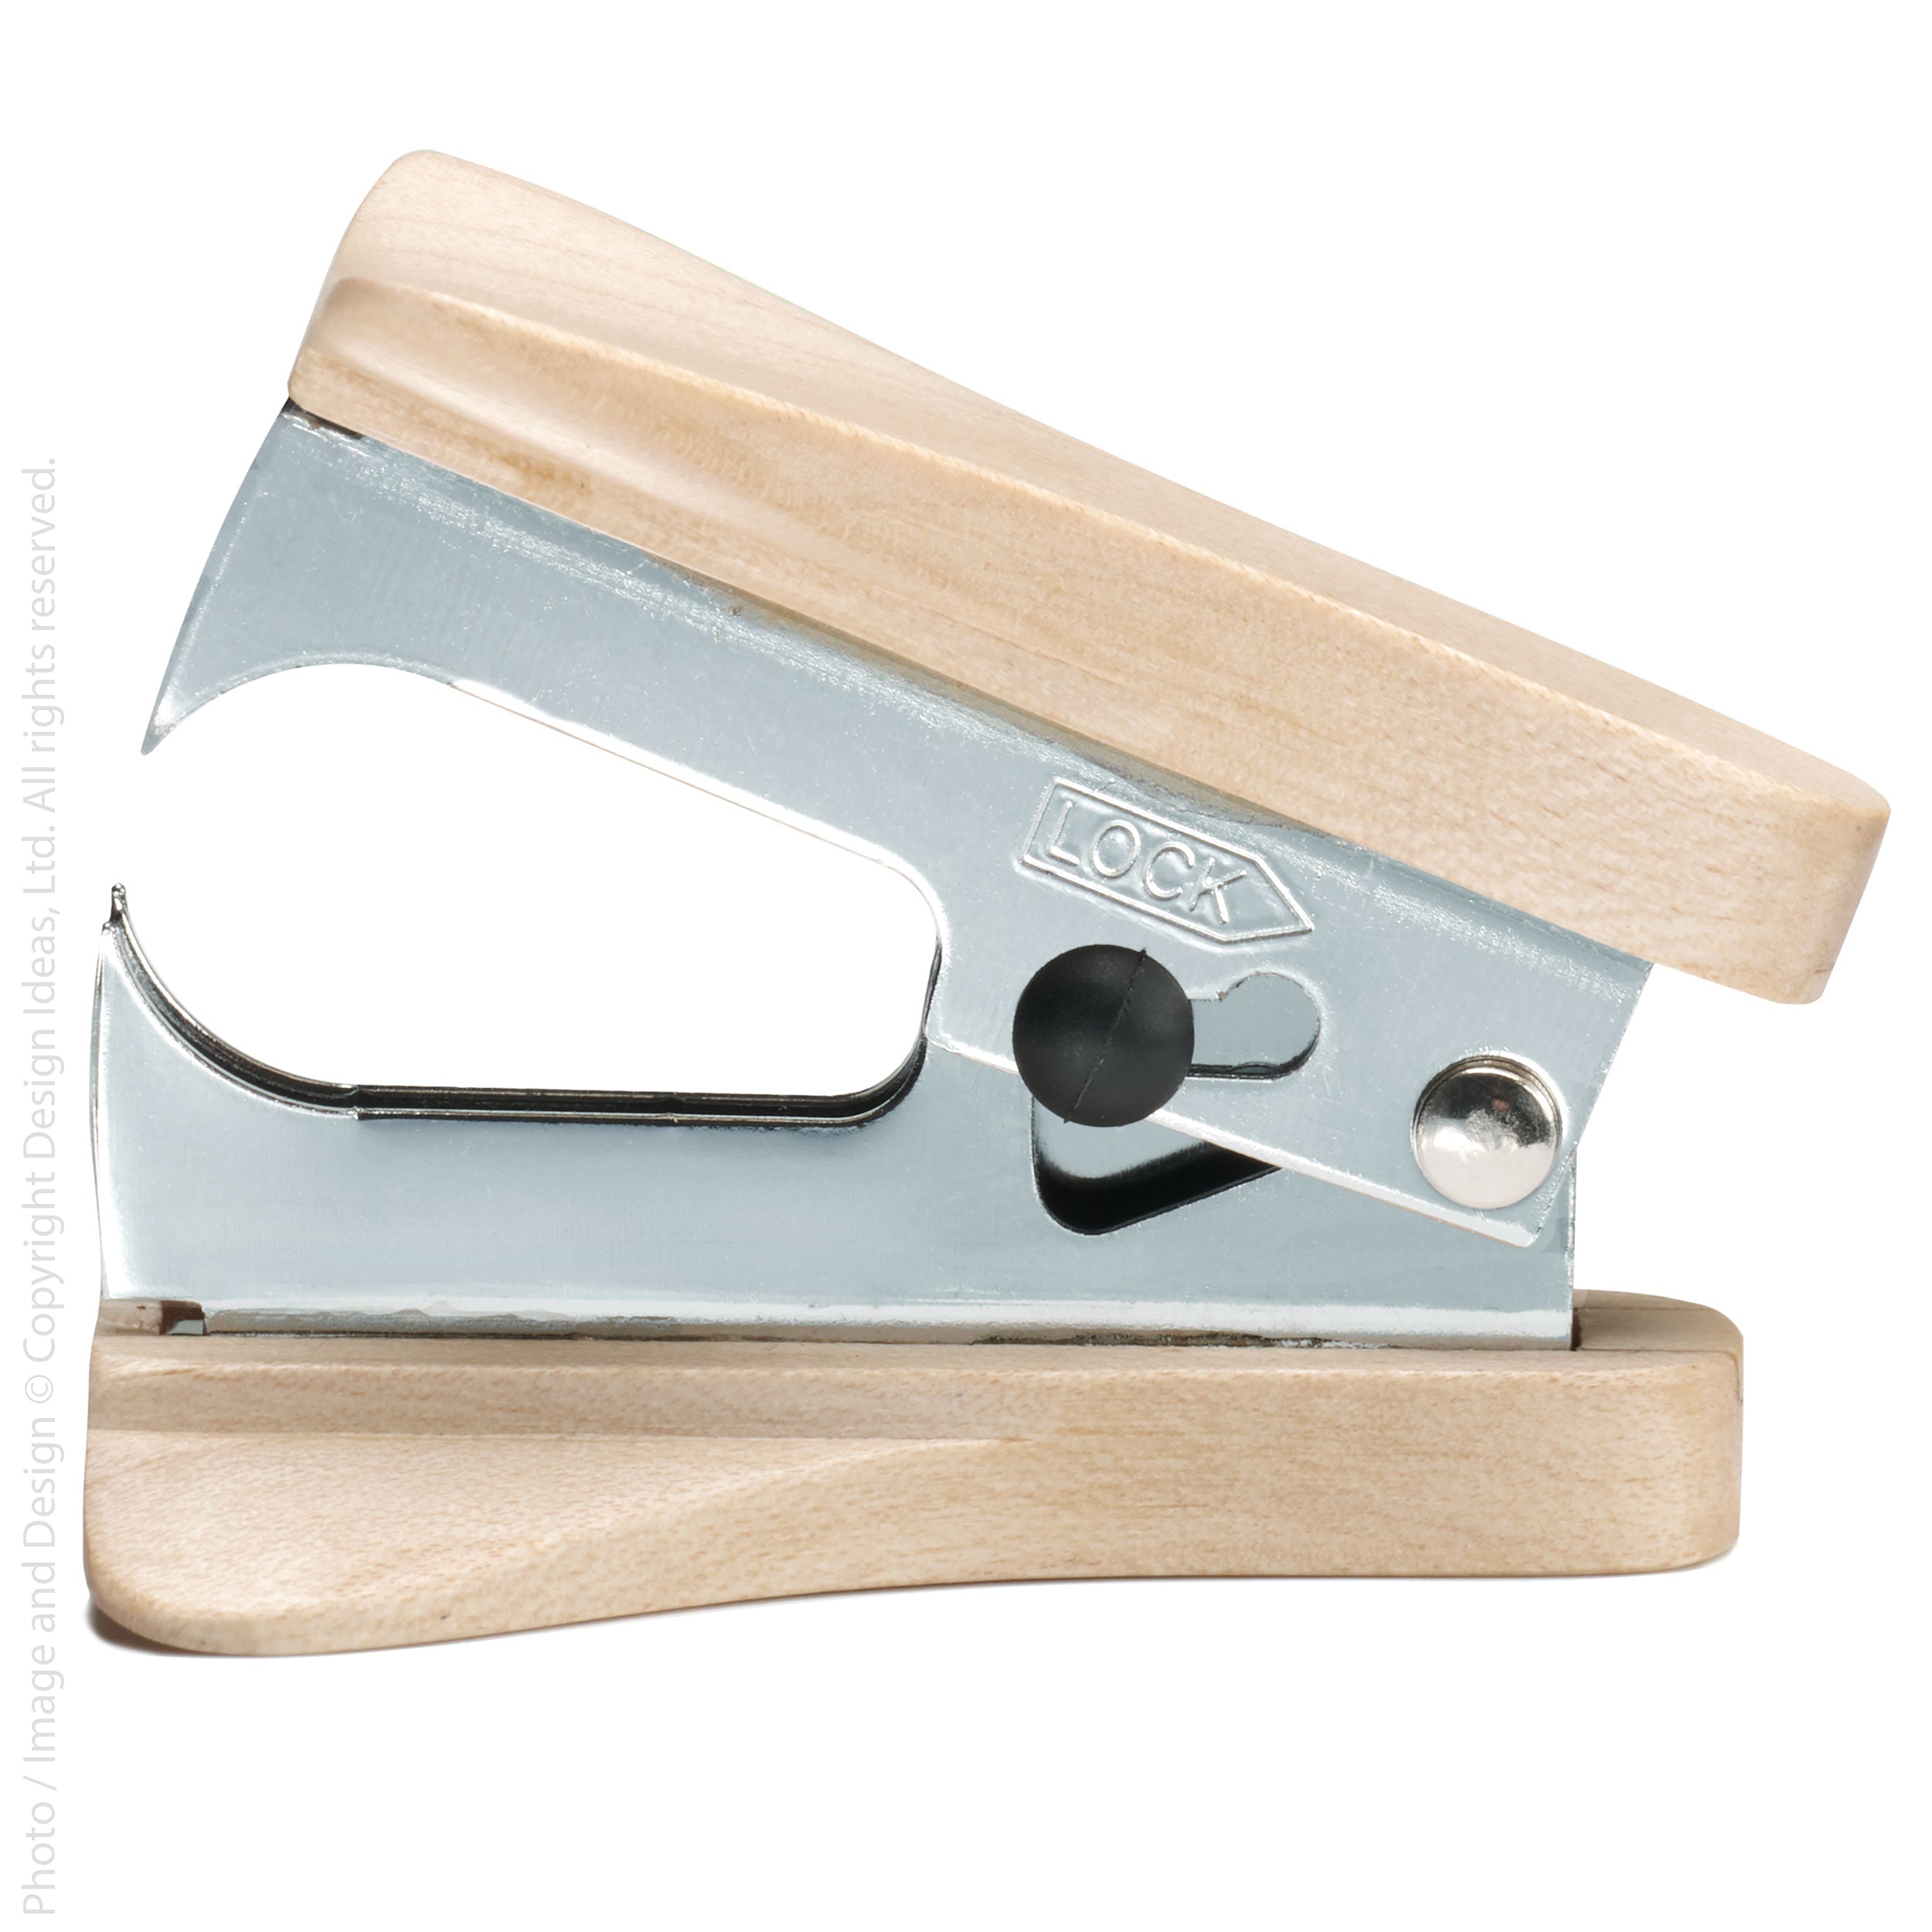 Upland Sycamore Staple Remover   | Image 4 | From the Upland Collection | Elegantly assembled with natural sycamore for long lasting use | Available in natural color | texxture home